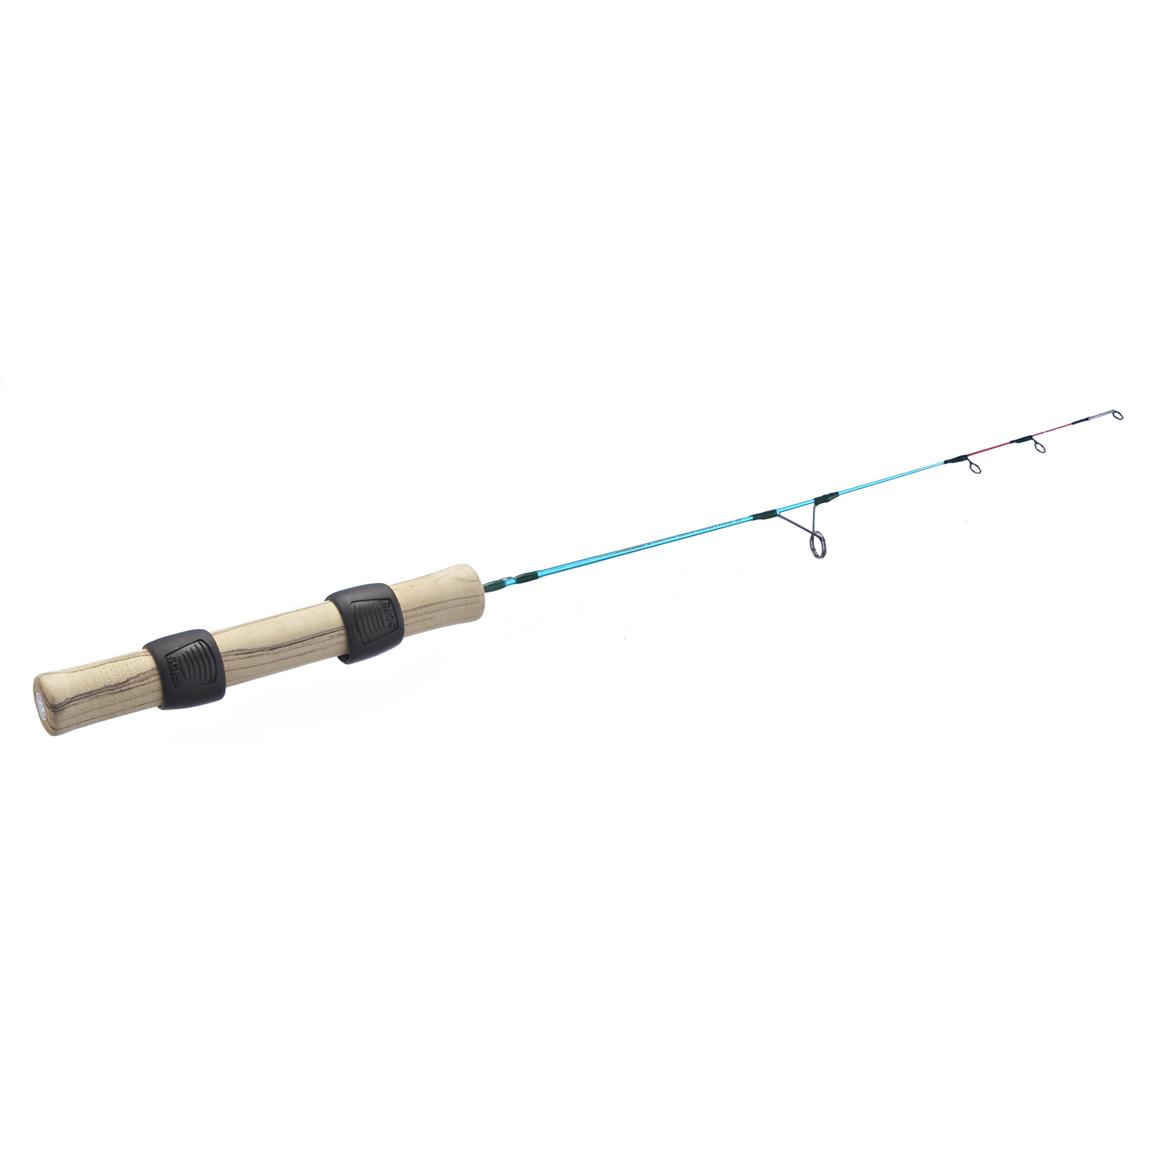 What rod would you guys pair with a 1000 size reel? - Main Forum - SurfTalk